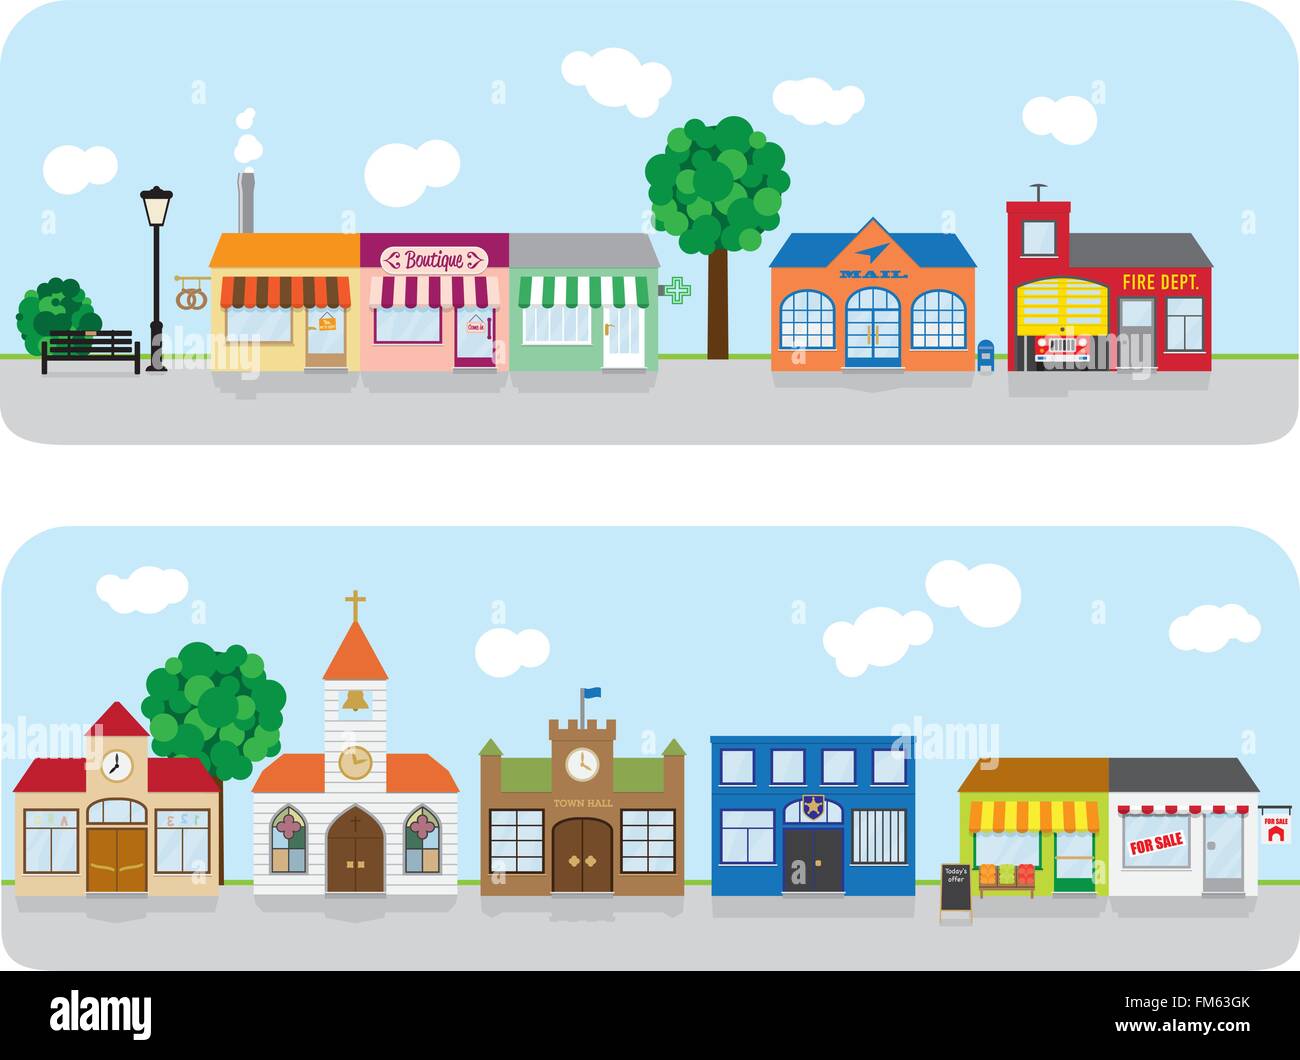 556,994 Small Town Images, Stock Photos, 3D objects, & Vectors